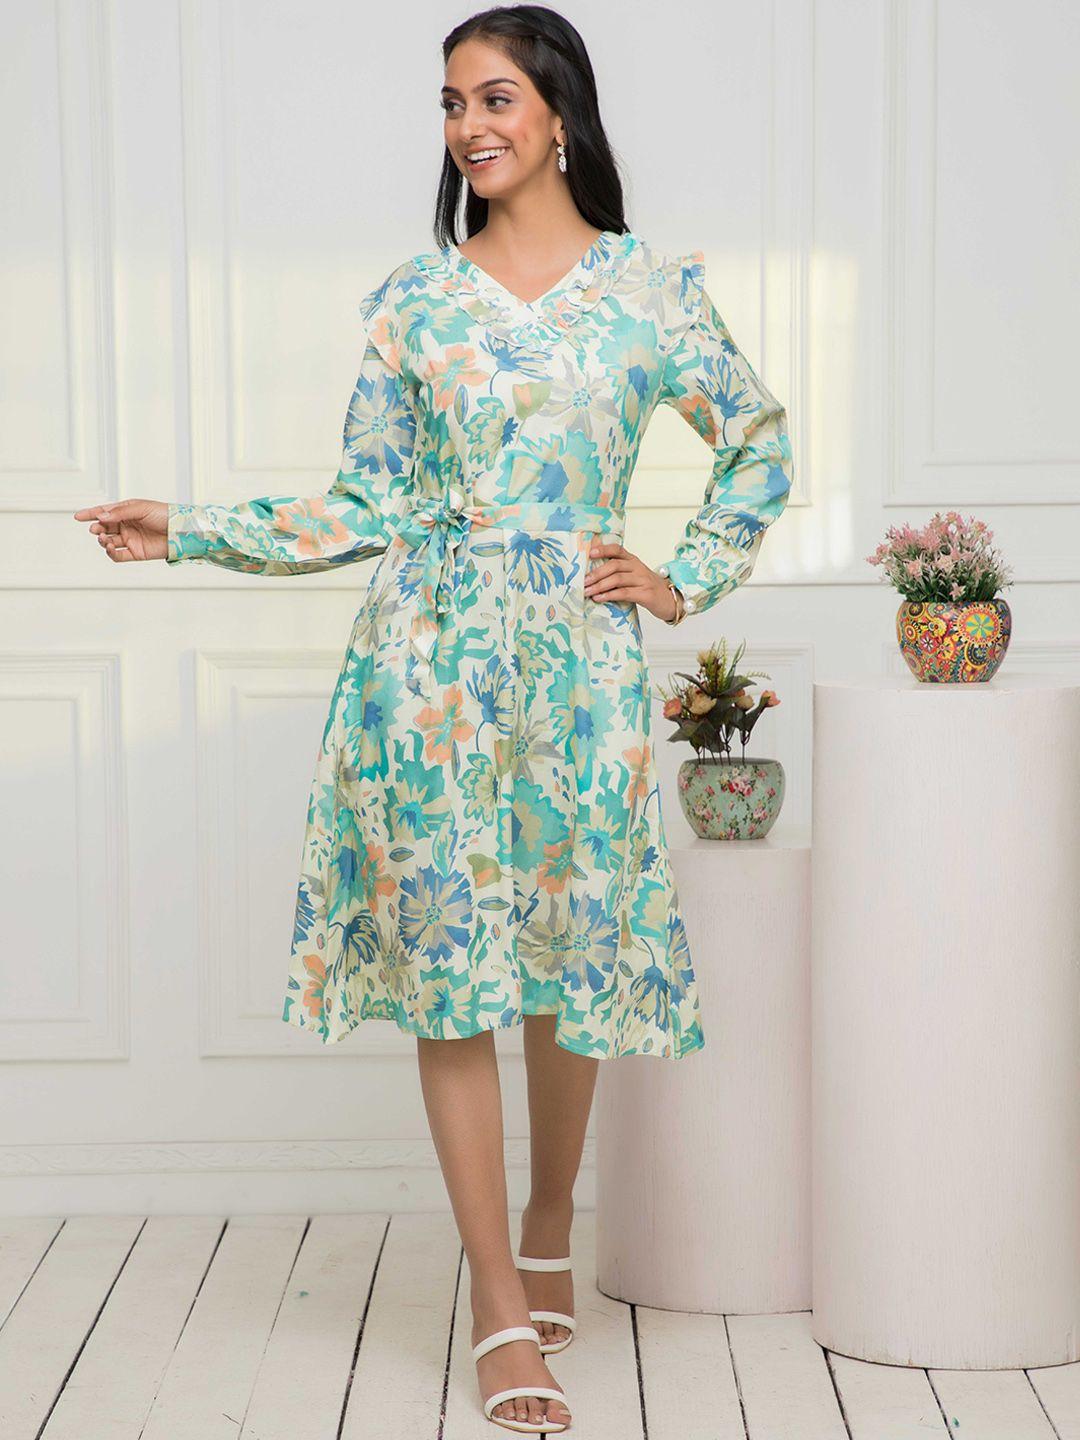 sangria sea green floral printed cuffed sleeves a-line dress